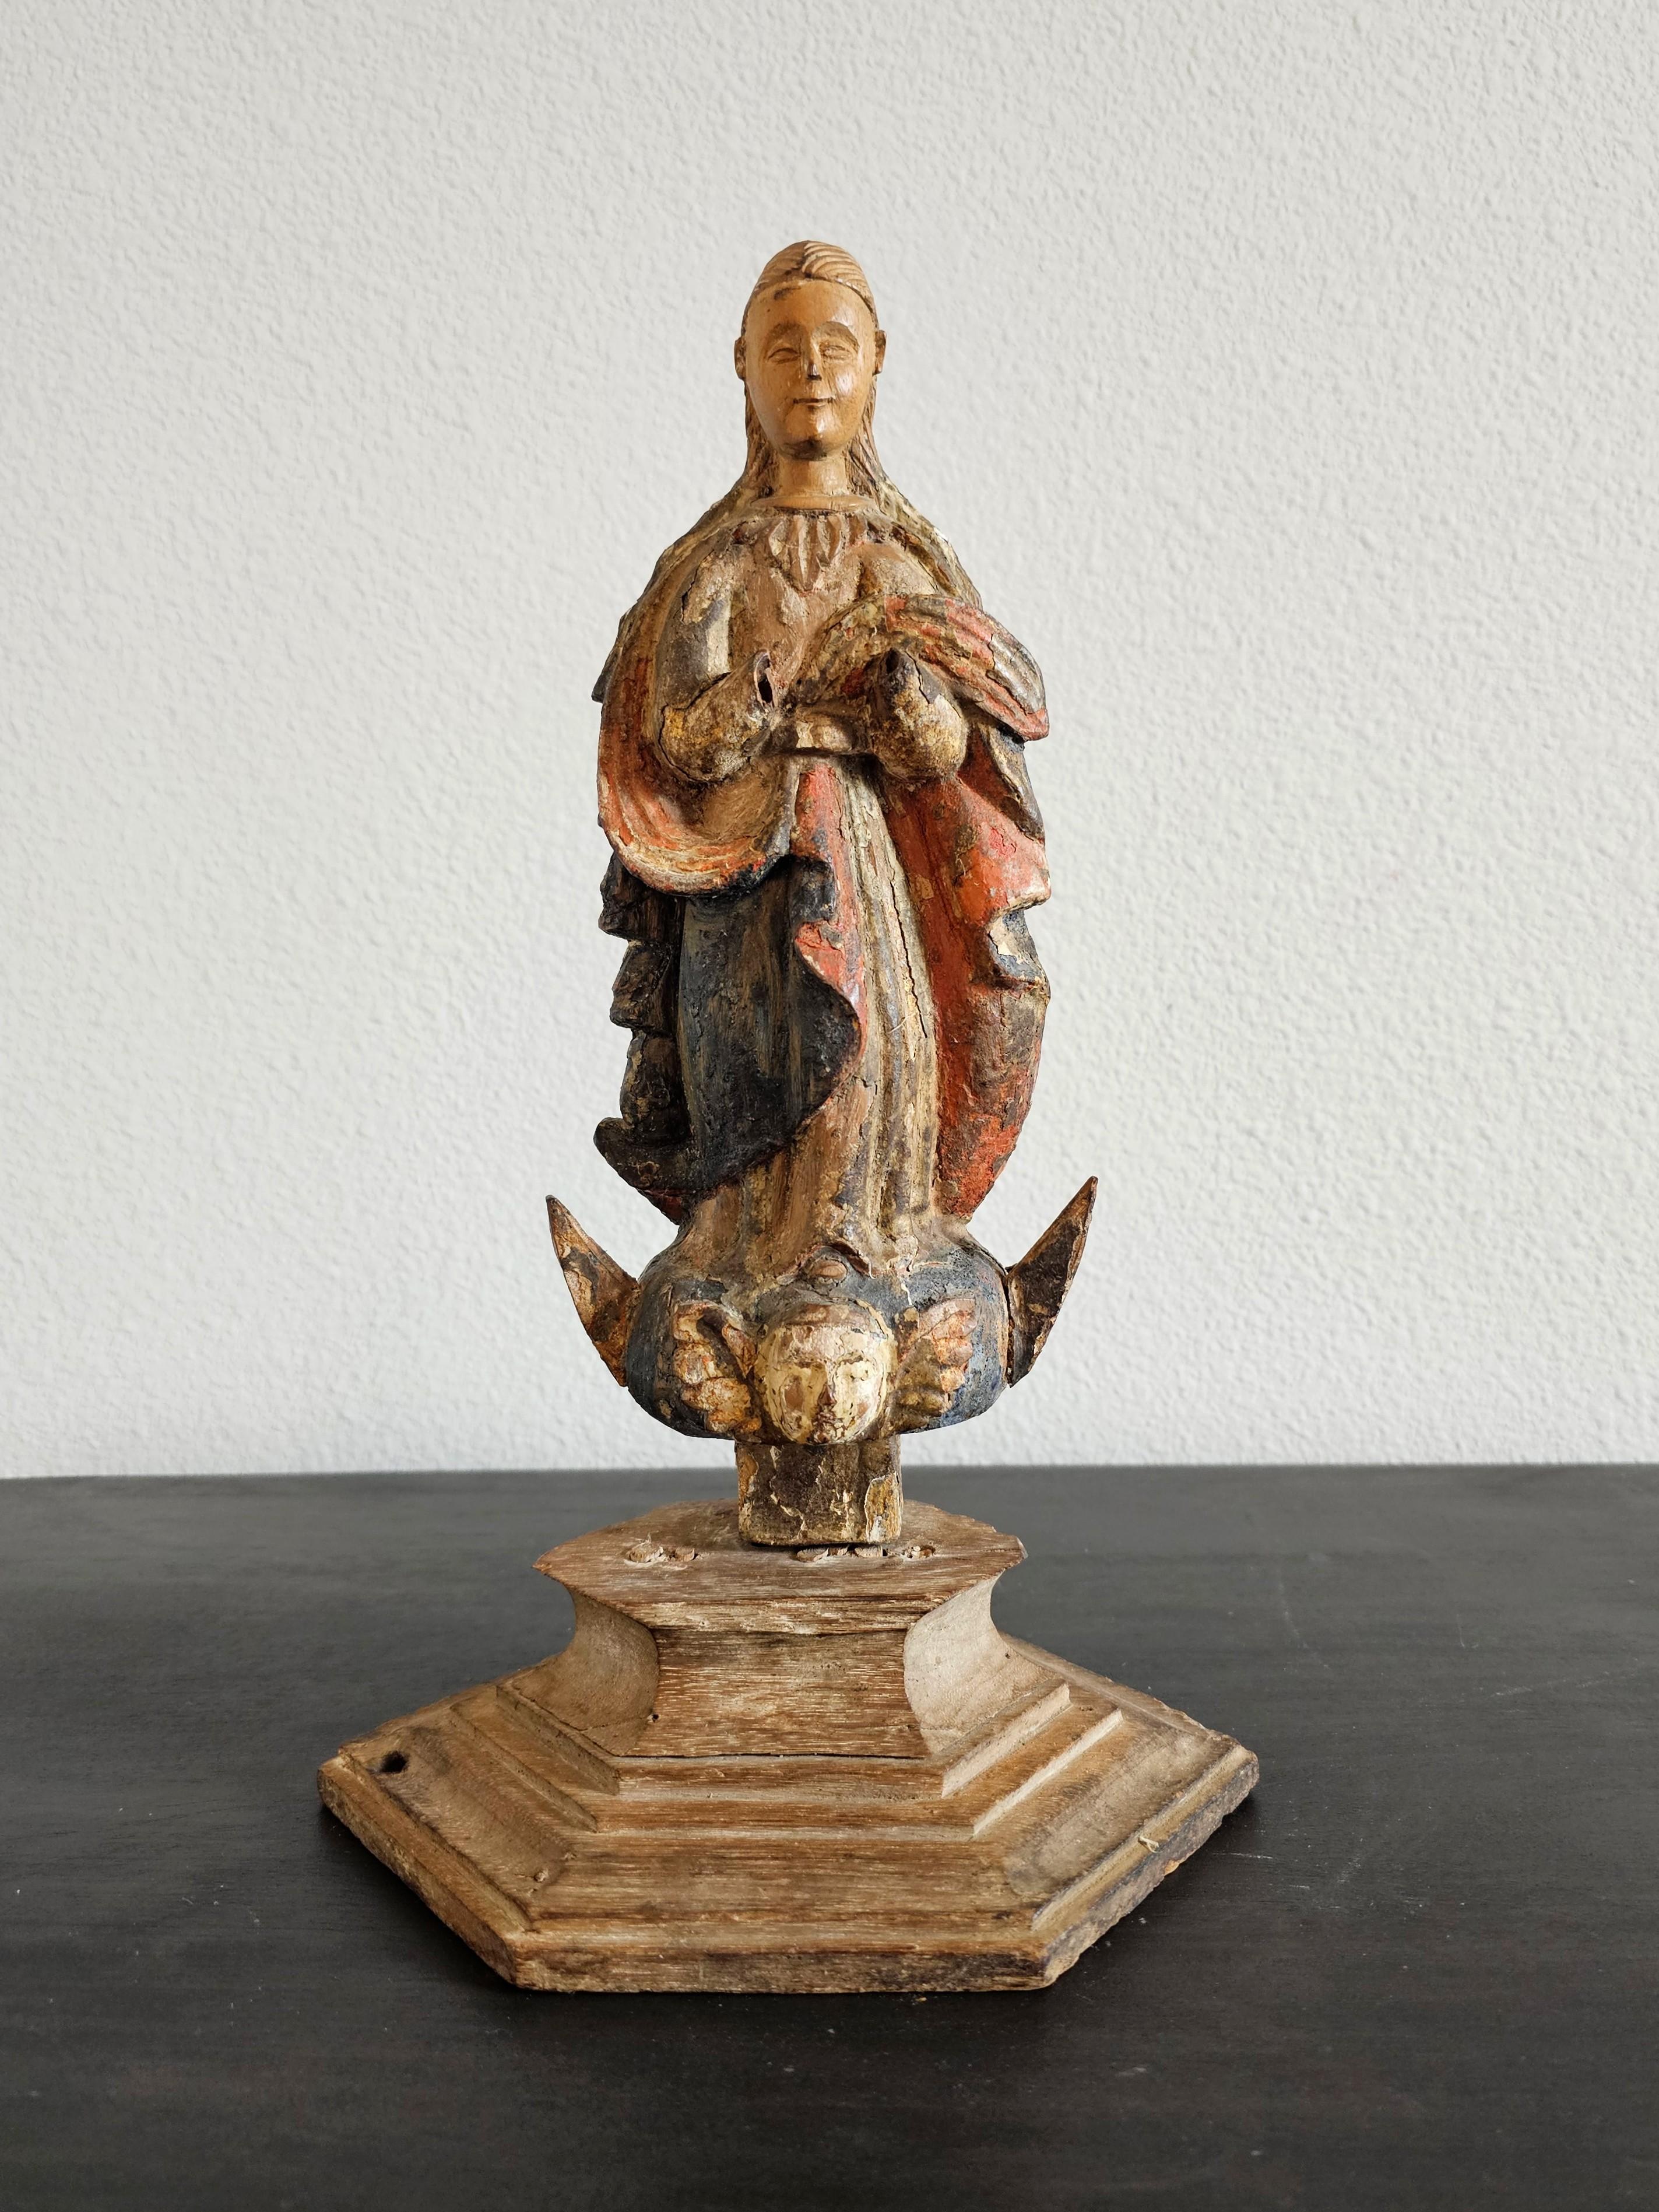 A scarce Baroque Period European antique hand carved and painted wood santo altar figure, 17th/18th century, the religious folk art sculpture depicting Madonna of the Immaculate Conception, with heavily distressed patina over the whole, having